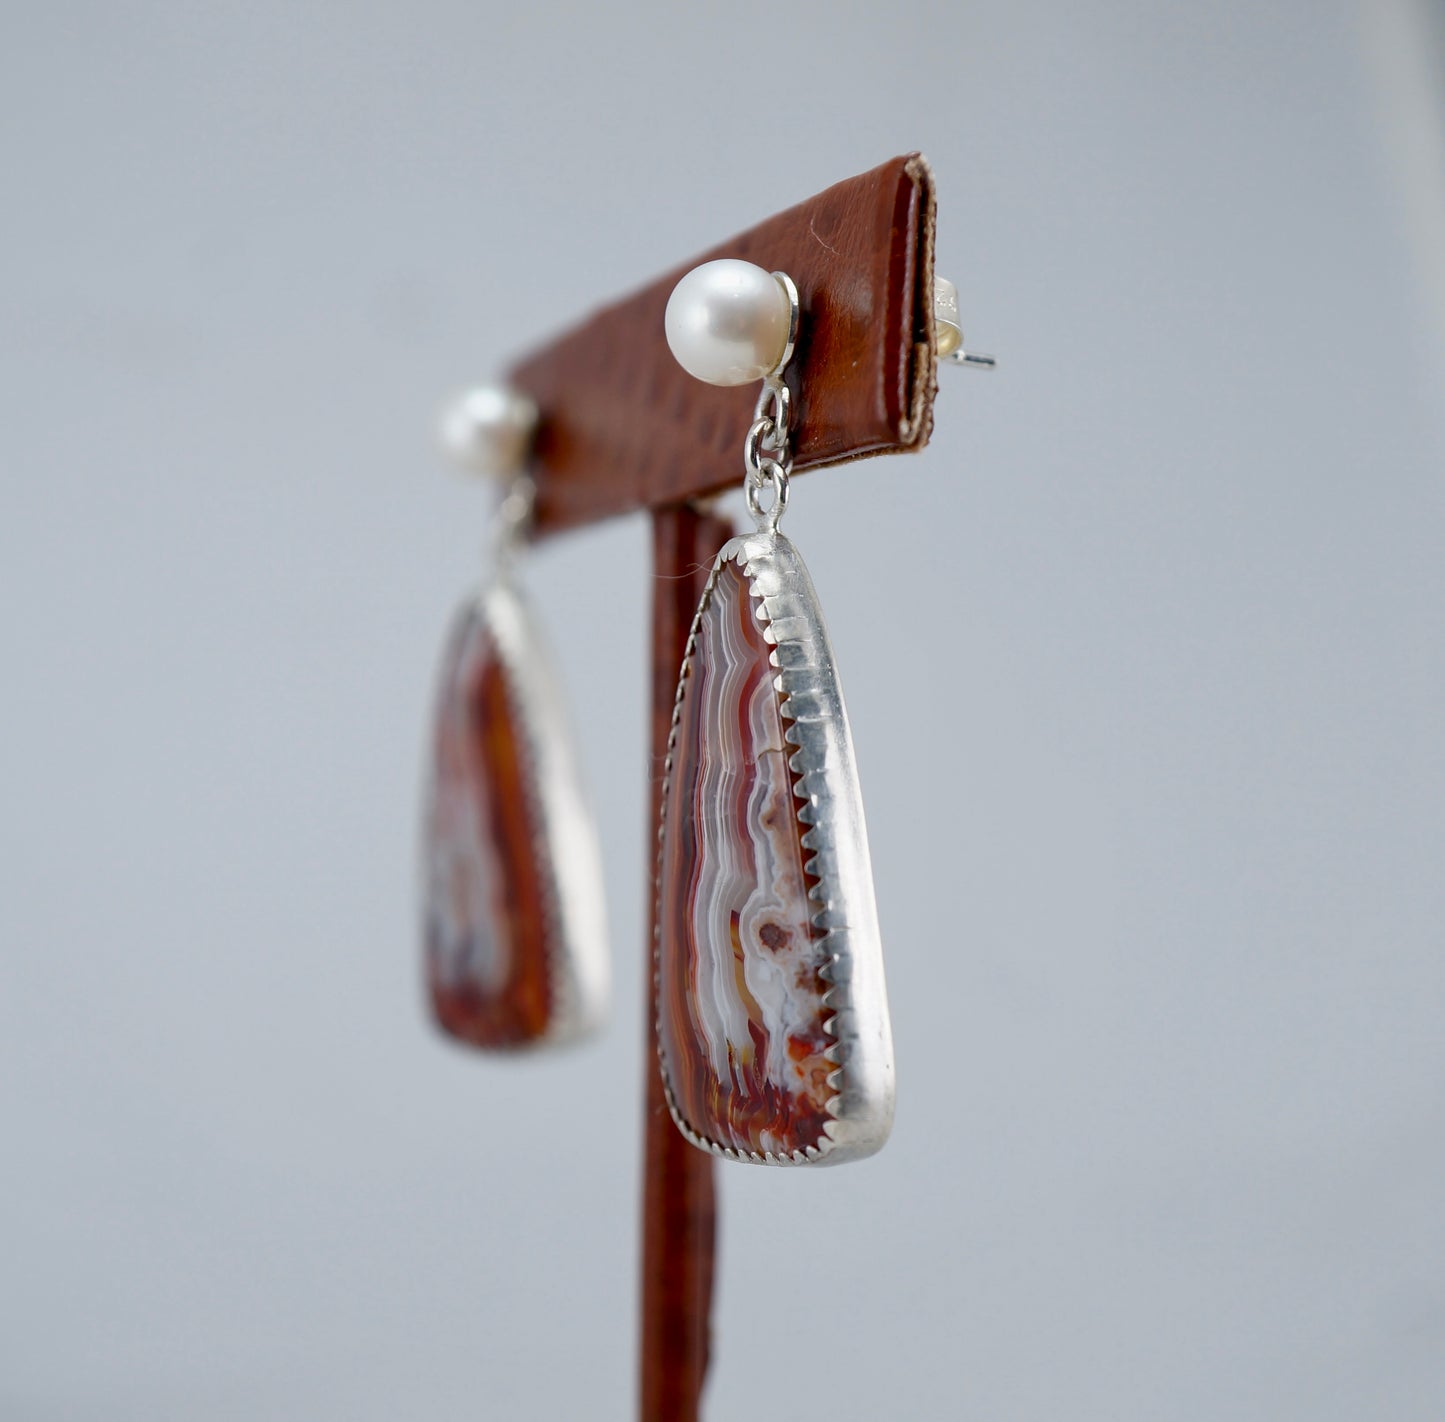 Rincon Lace Agate earrings w/ freshwater cultured Pearls